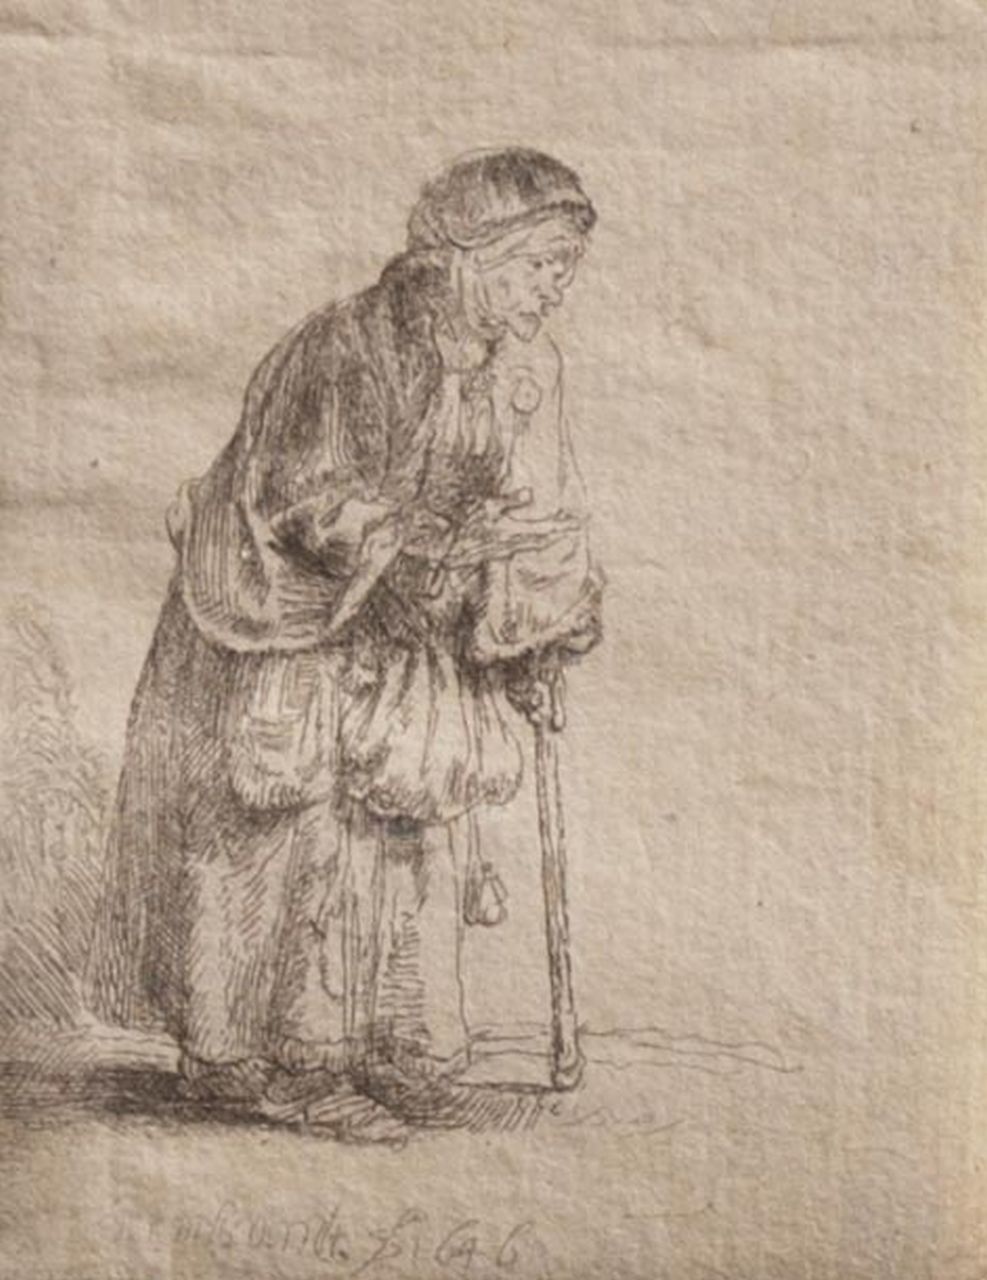 Rembrandt (Rembrandt Harmensz. van Rijn)   | Rembrandt (Rembrandt Harmensz. van Rijn), Beggar woman with stick, etching 8.0 x 6.3 cm, signed l.c. in the plate and dated 1646 in the plate